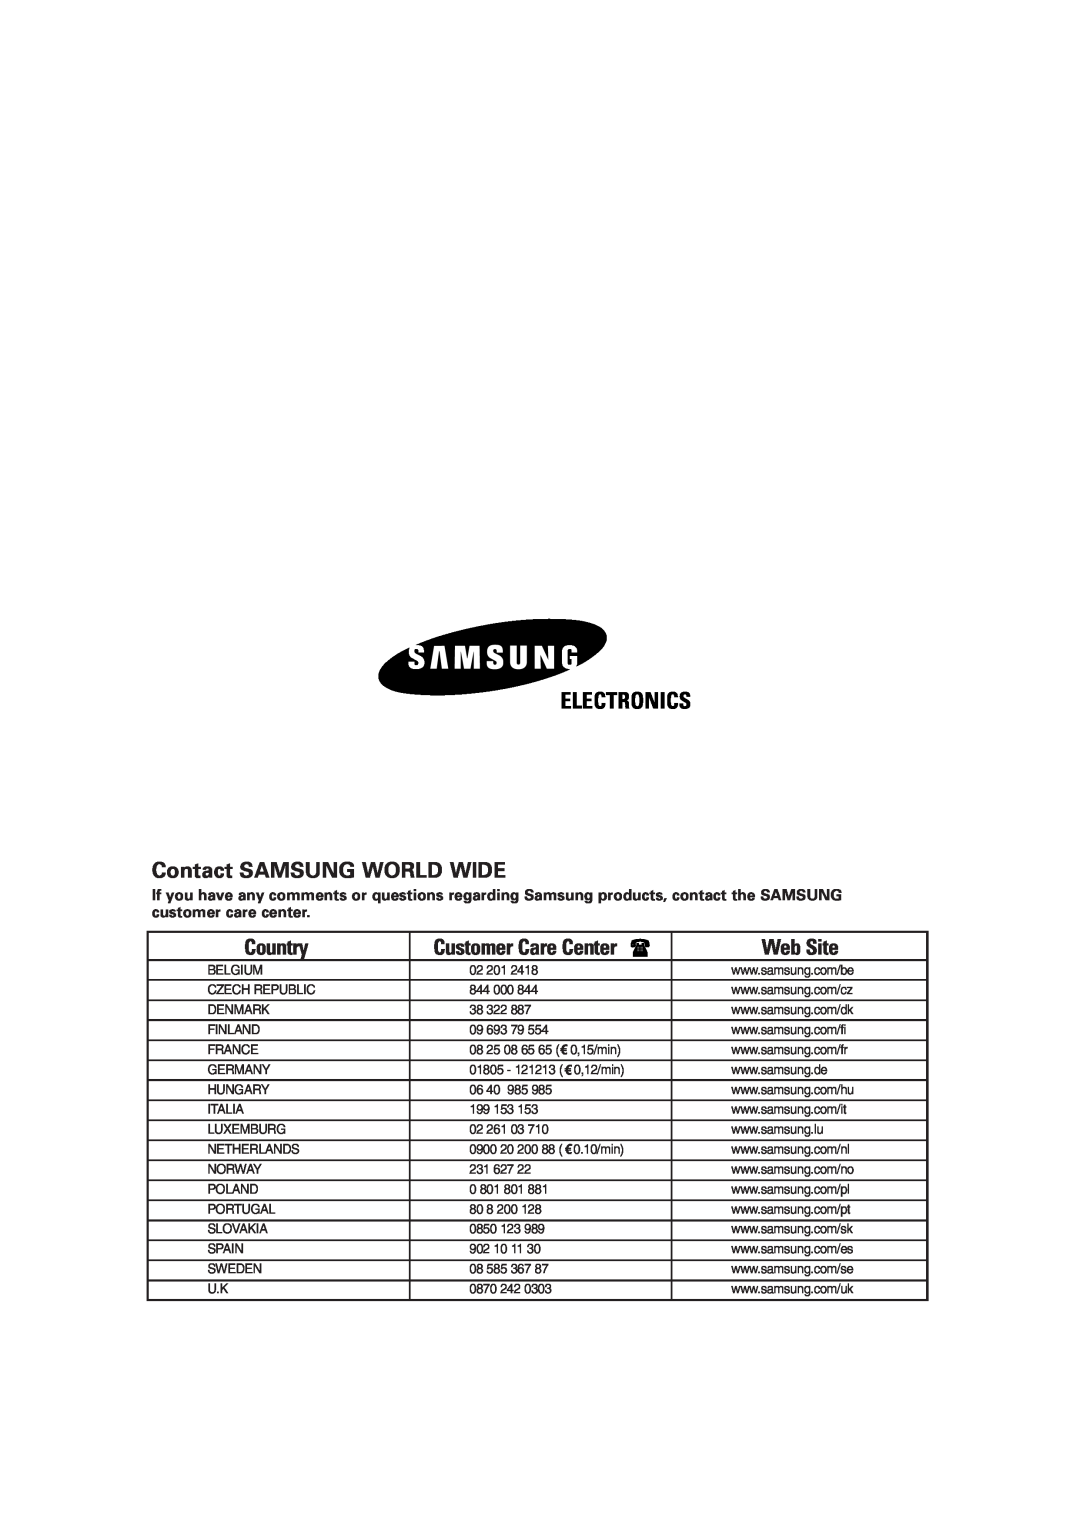 Samsung AS18HPAX, AS09HPAN, AS09HPAX Electronics, Contact SAMSUNG WORLD WIDE, Country, Customer Care Center, Web Site 